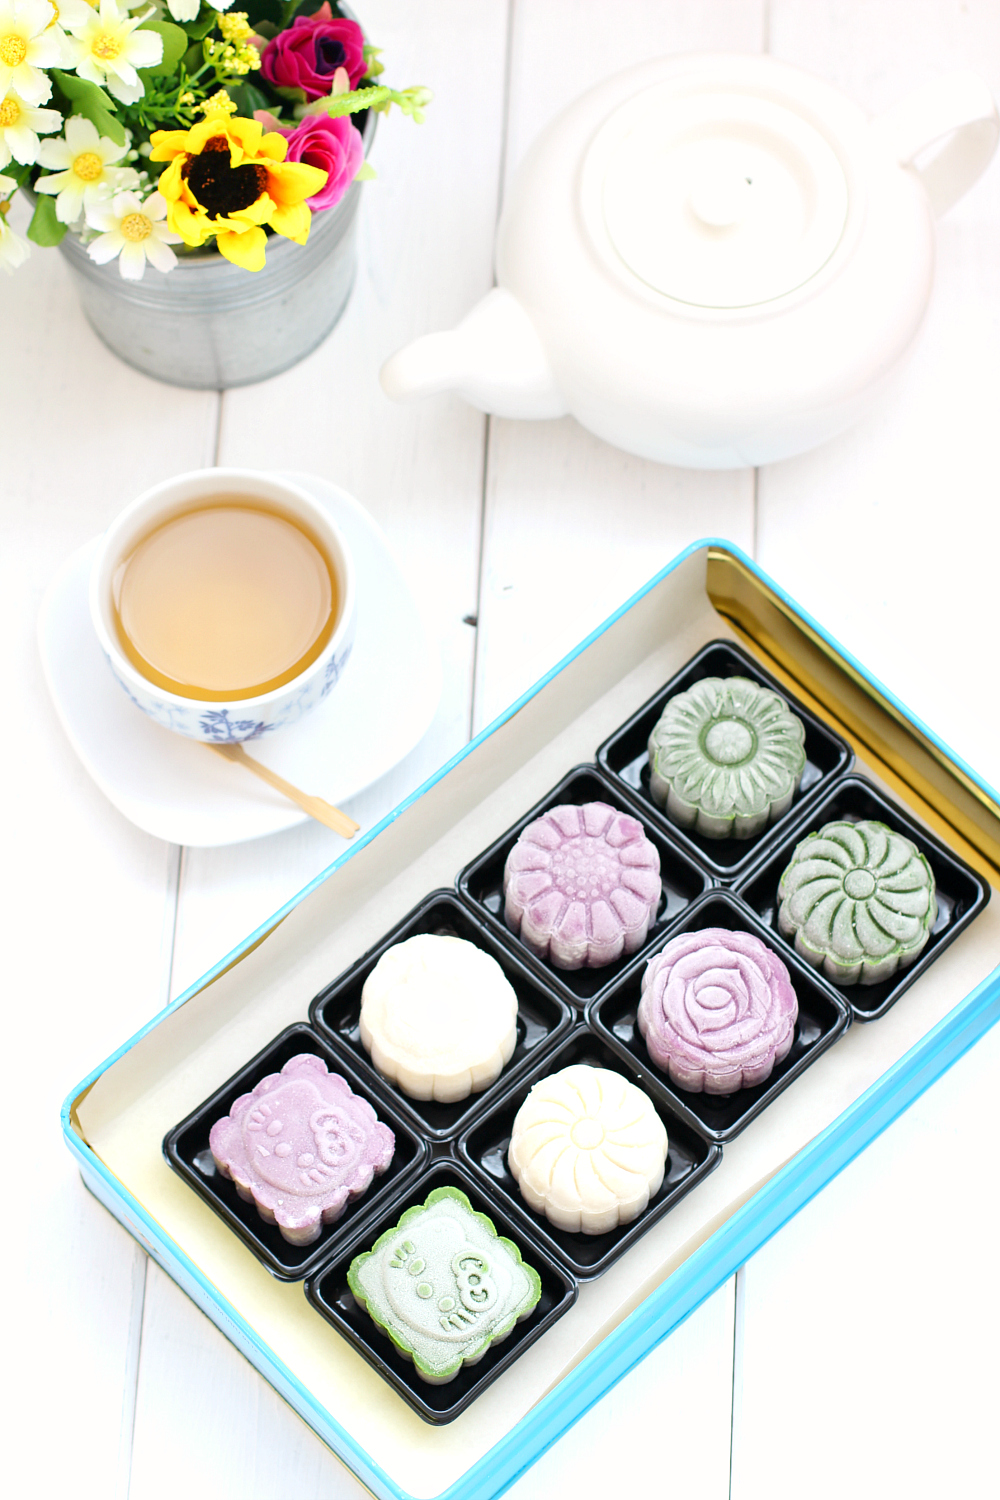 Snowskin mooncakes with purple sweet potato and cream cheese filling